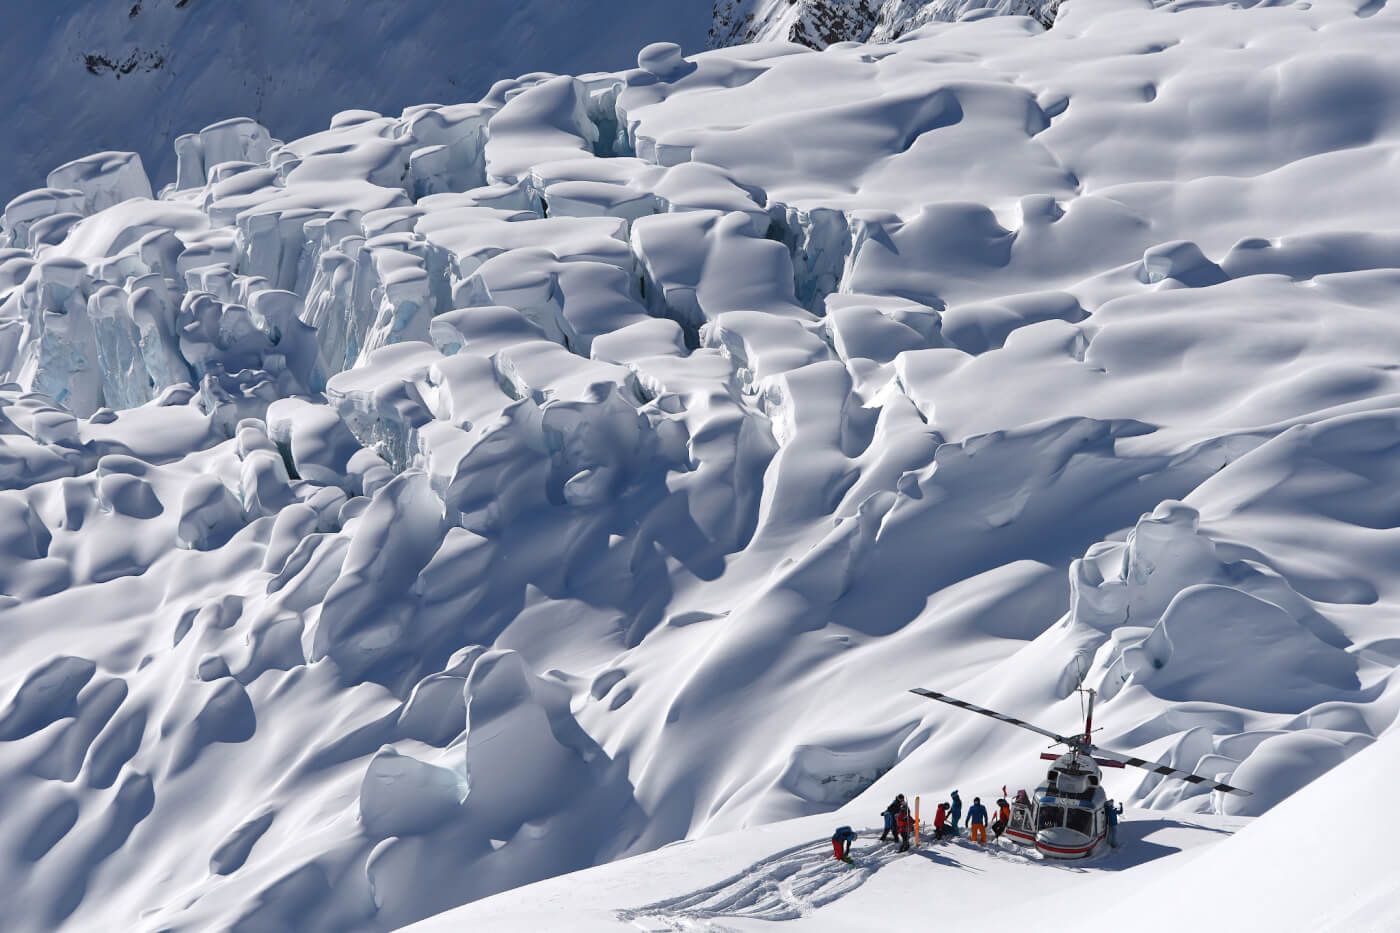 A helicopter sits on a snowy landscape with a group of people standing next to it